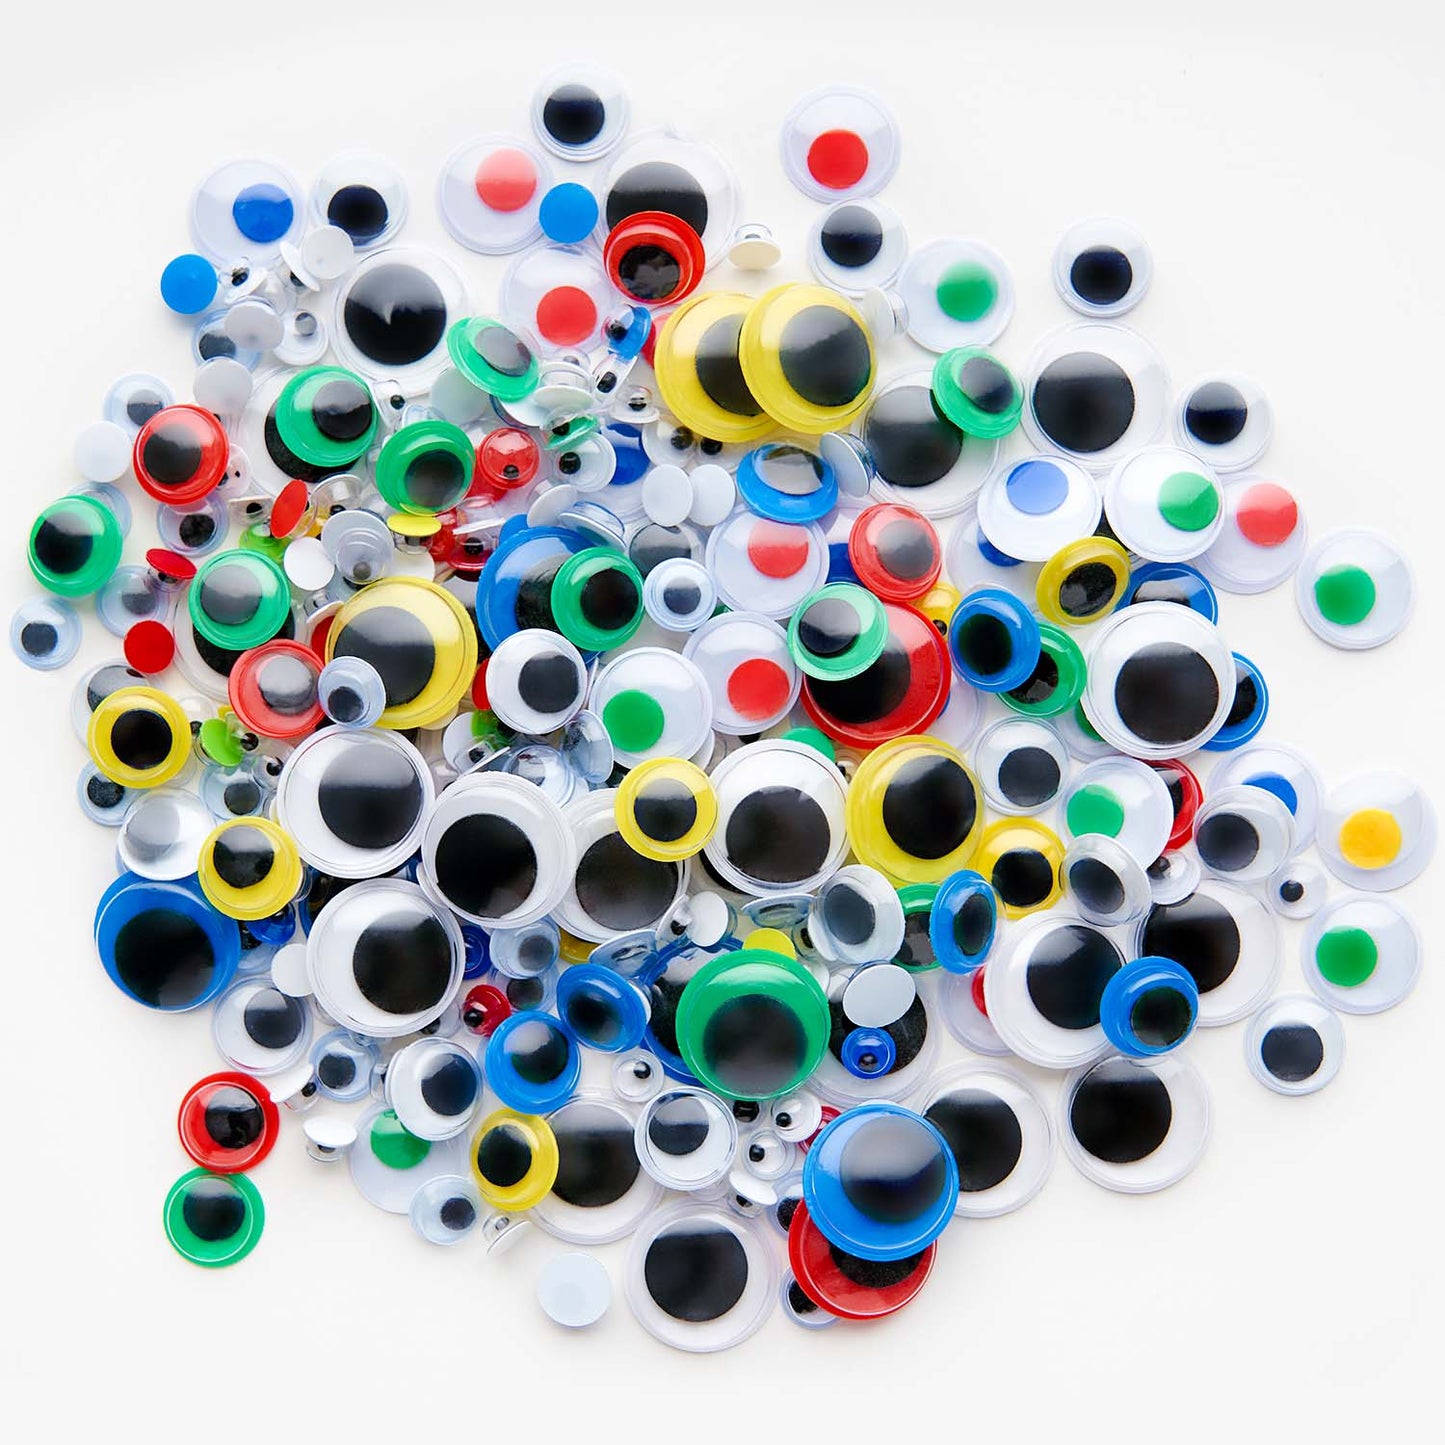 Googly Eyes, Assorted Sizes & Colors - Set of 3000 Pieces